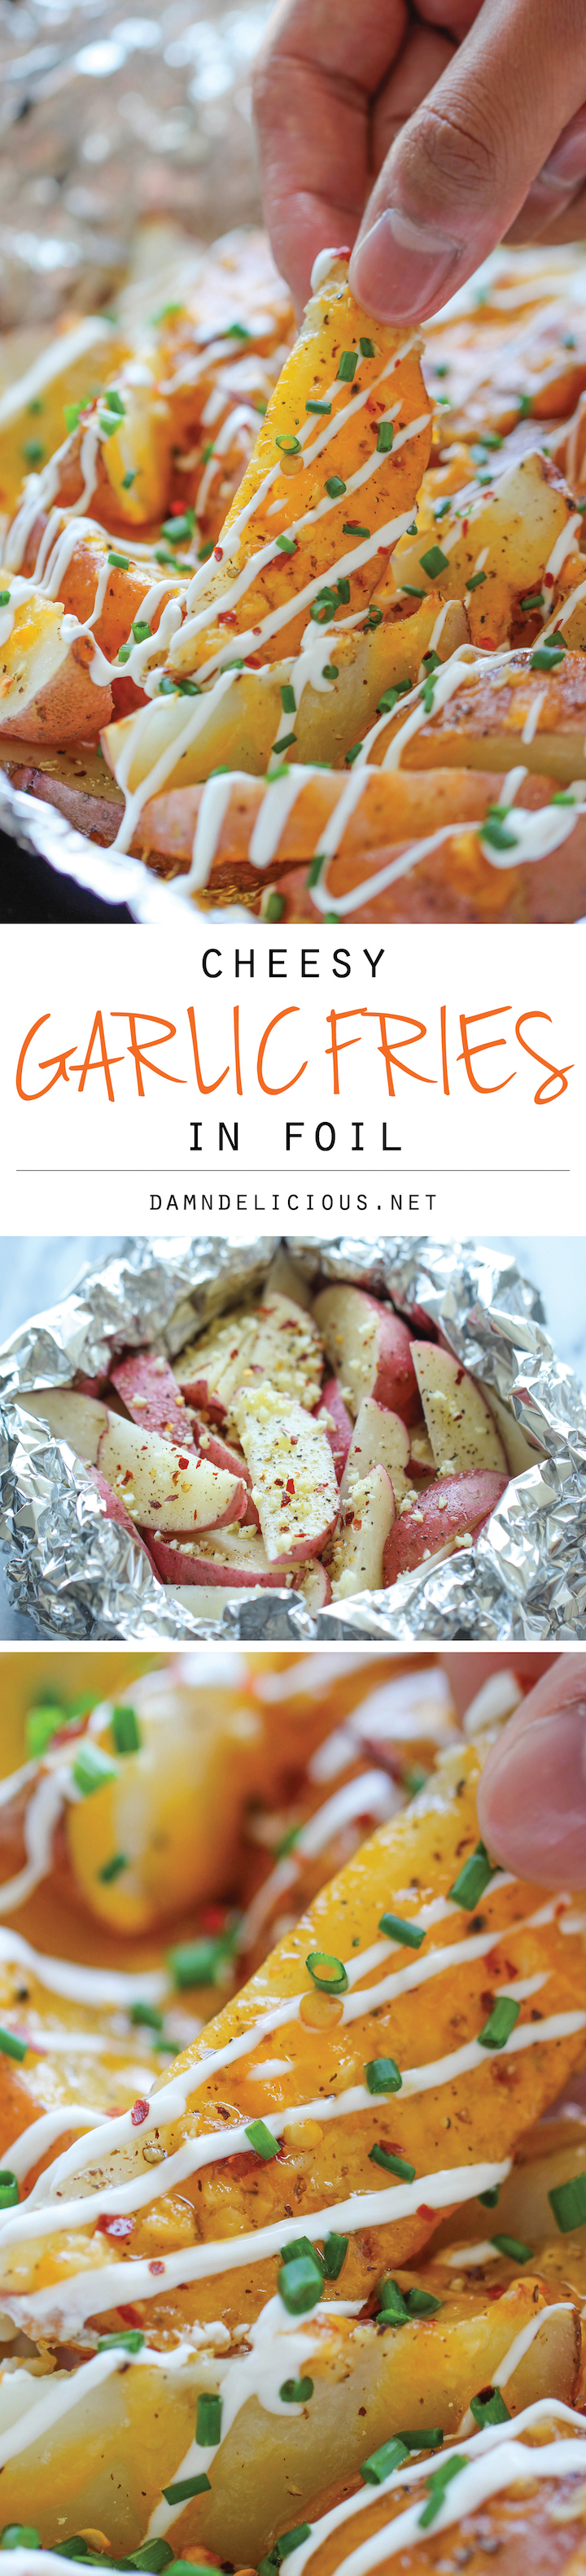 Cheesy Garlic Fries in Foil - The easiest, cheesiest fries you will ever make in foil packets, baked to absolute crisp perfection!